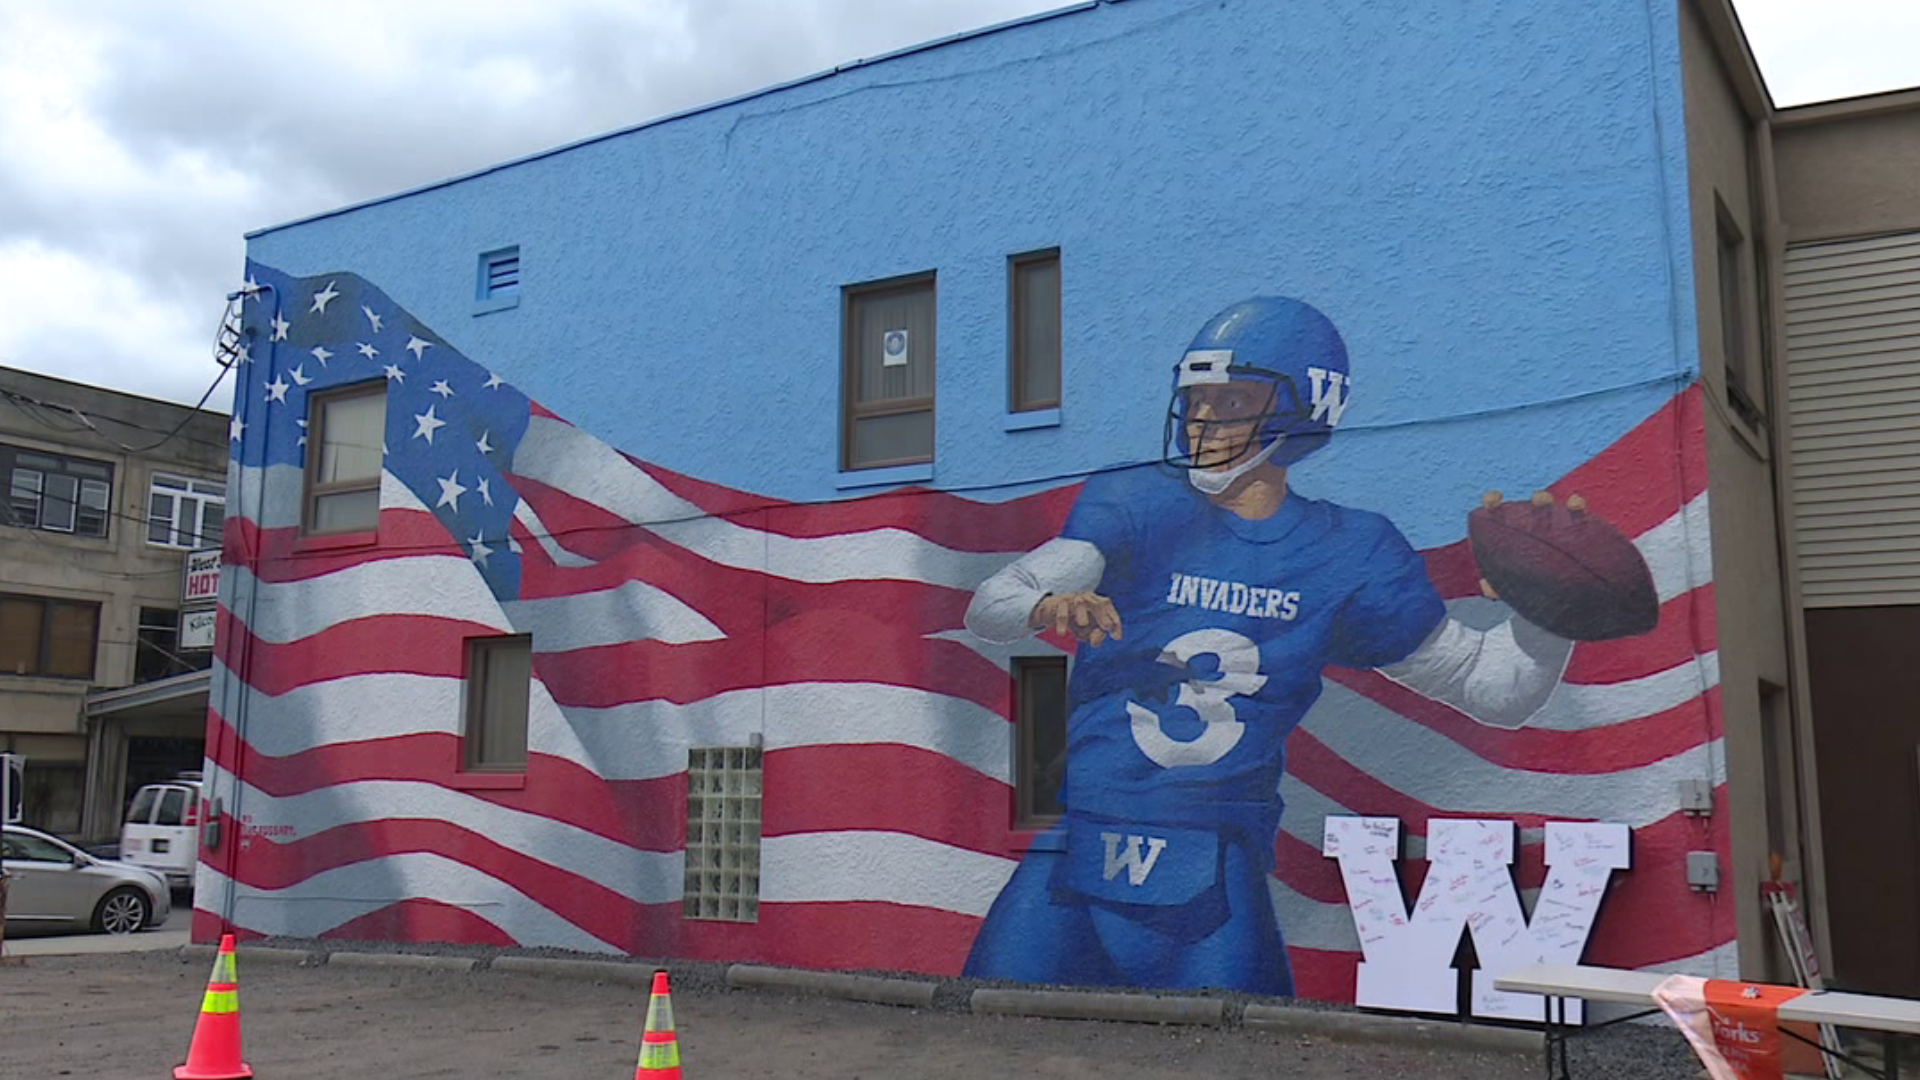 Local football player featured larger than life.